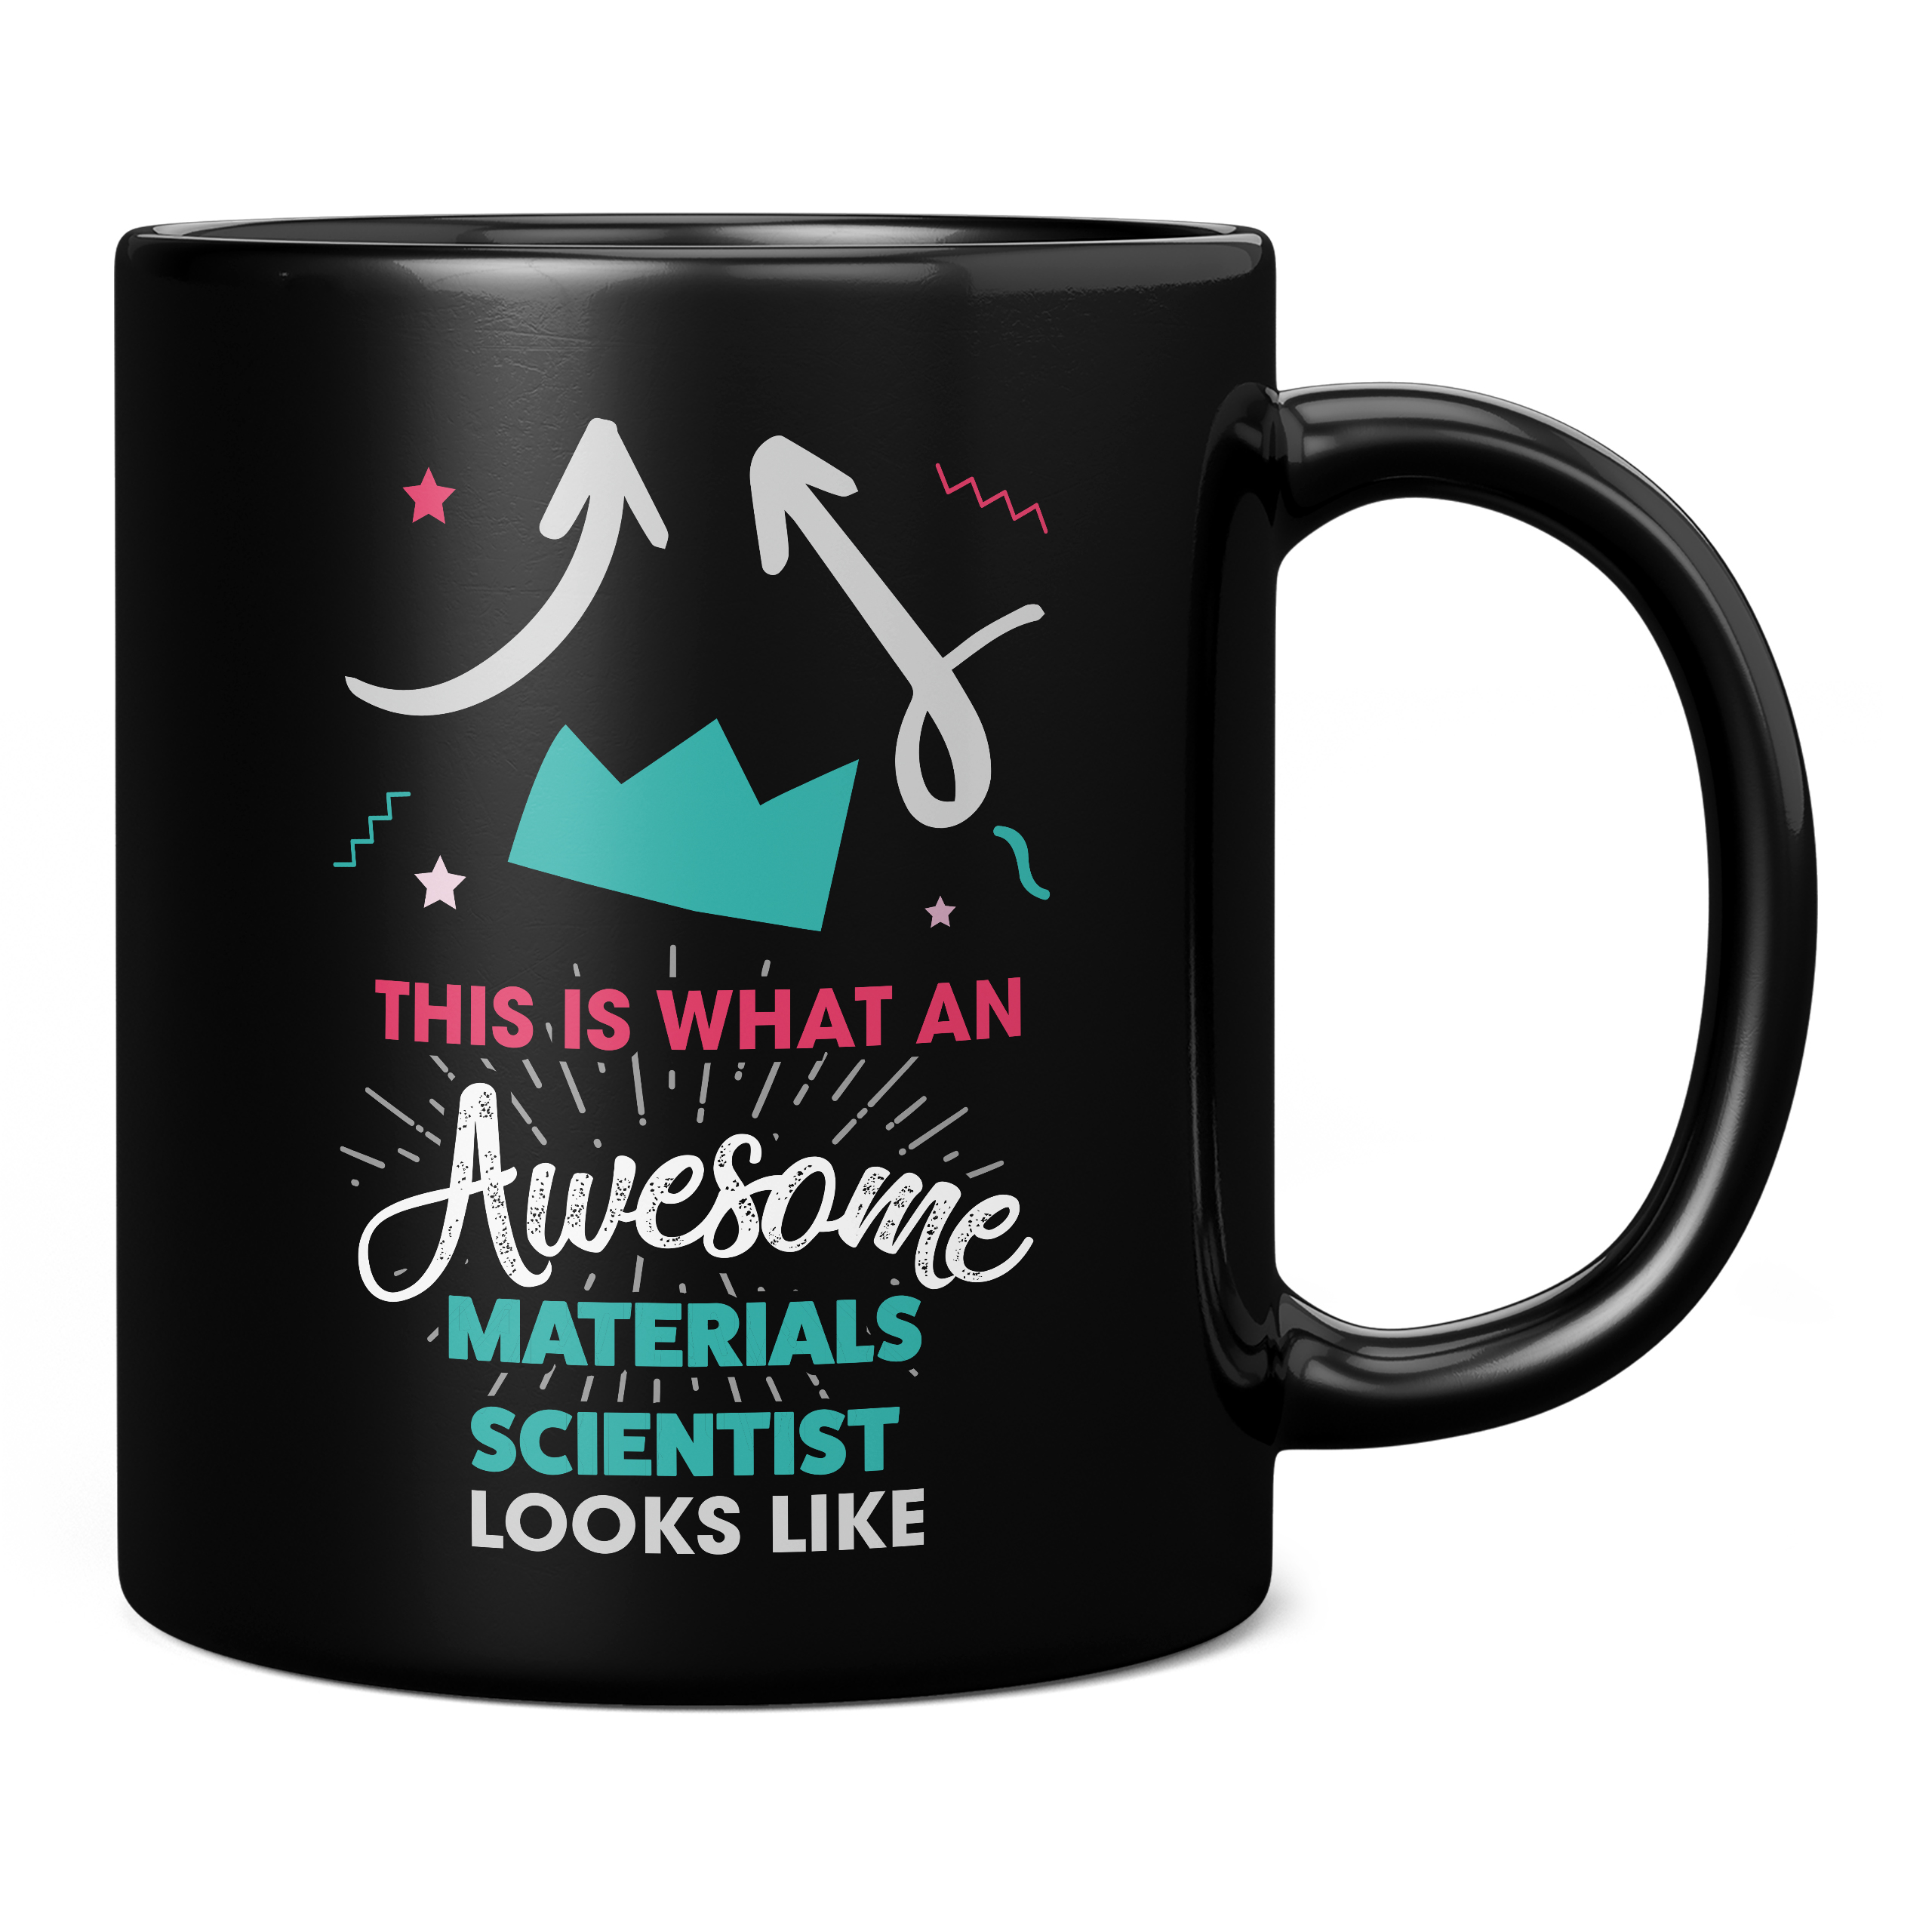 THIS IS WHAT AN AWESOME MATERIALS SCIENTIST LOOKS LIKE 11OZ NOVELTY MUG